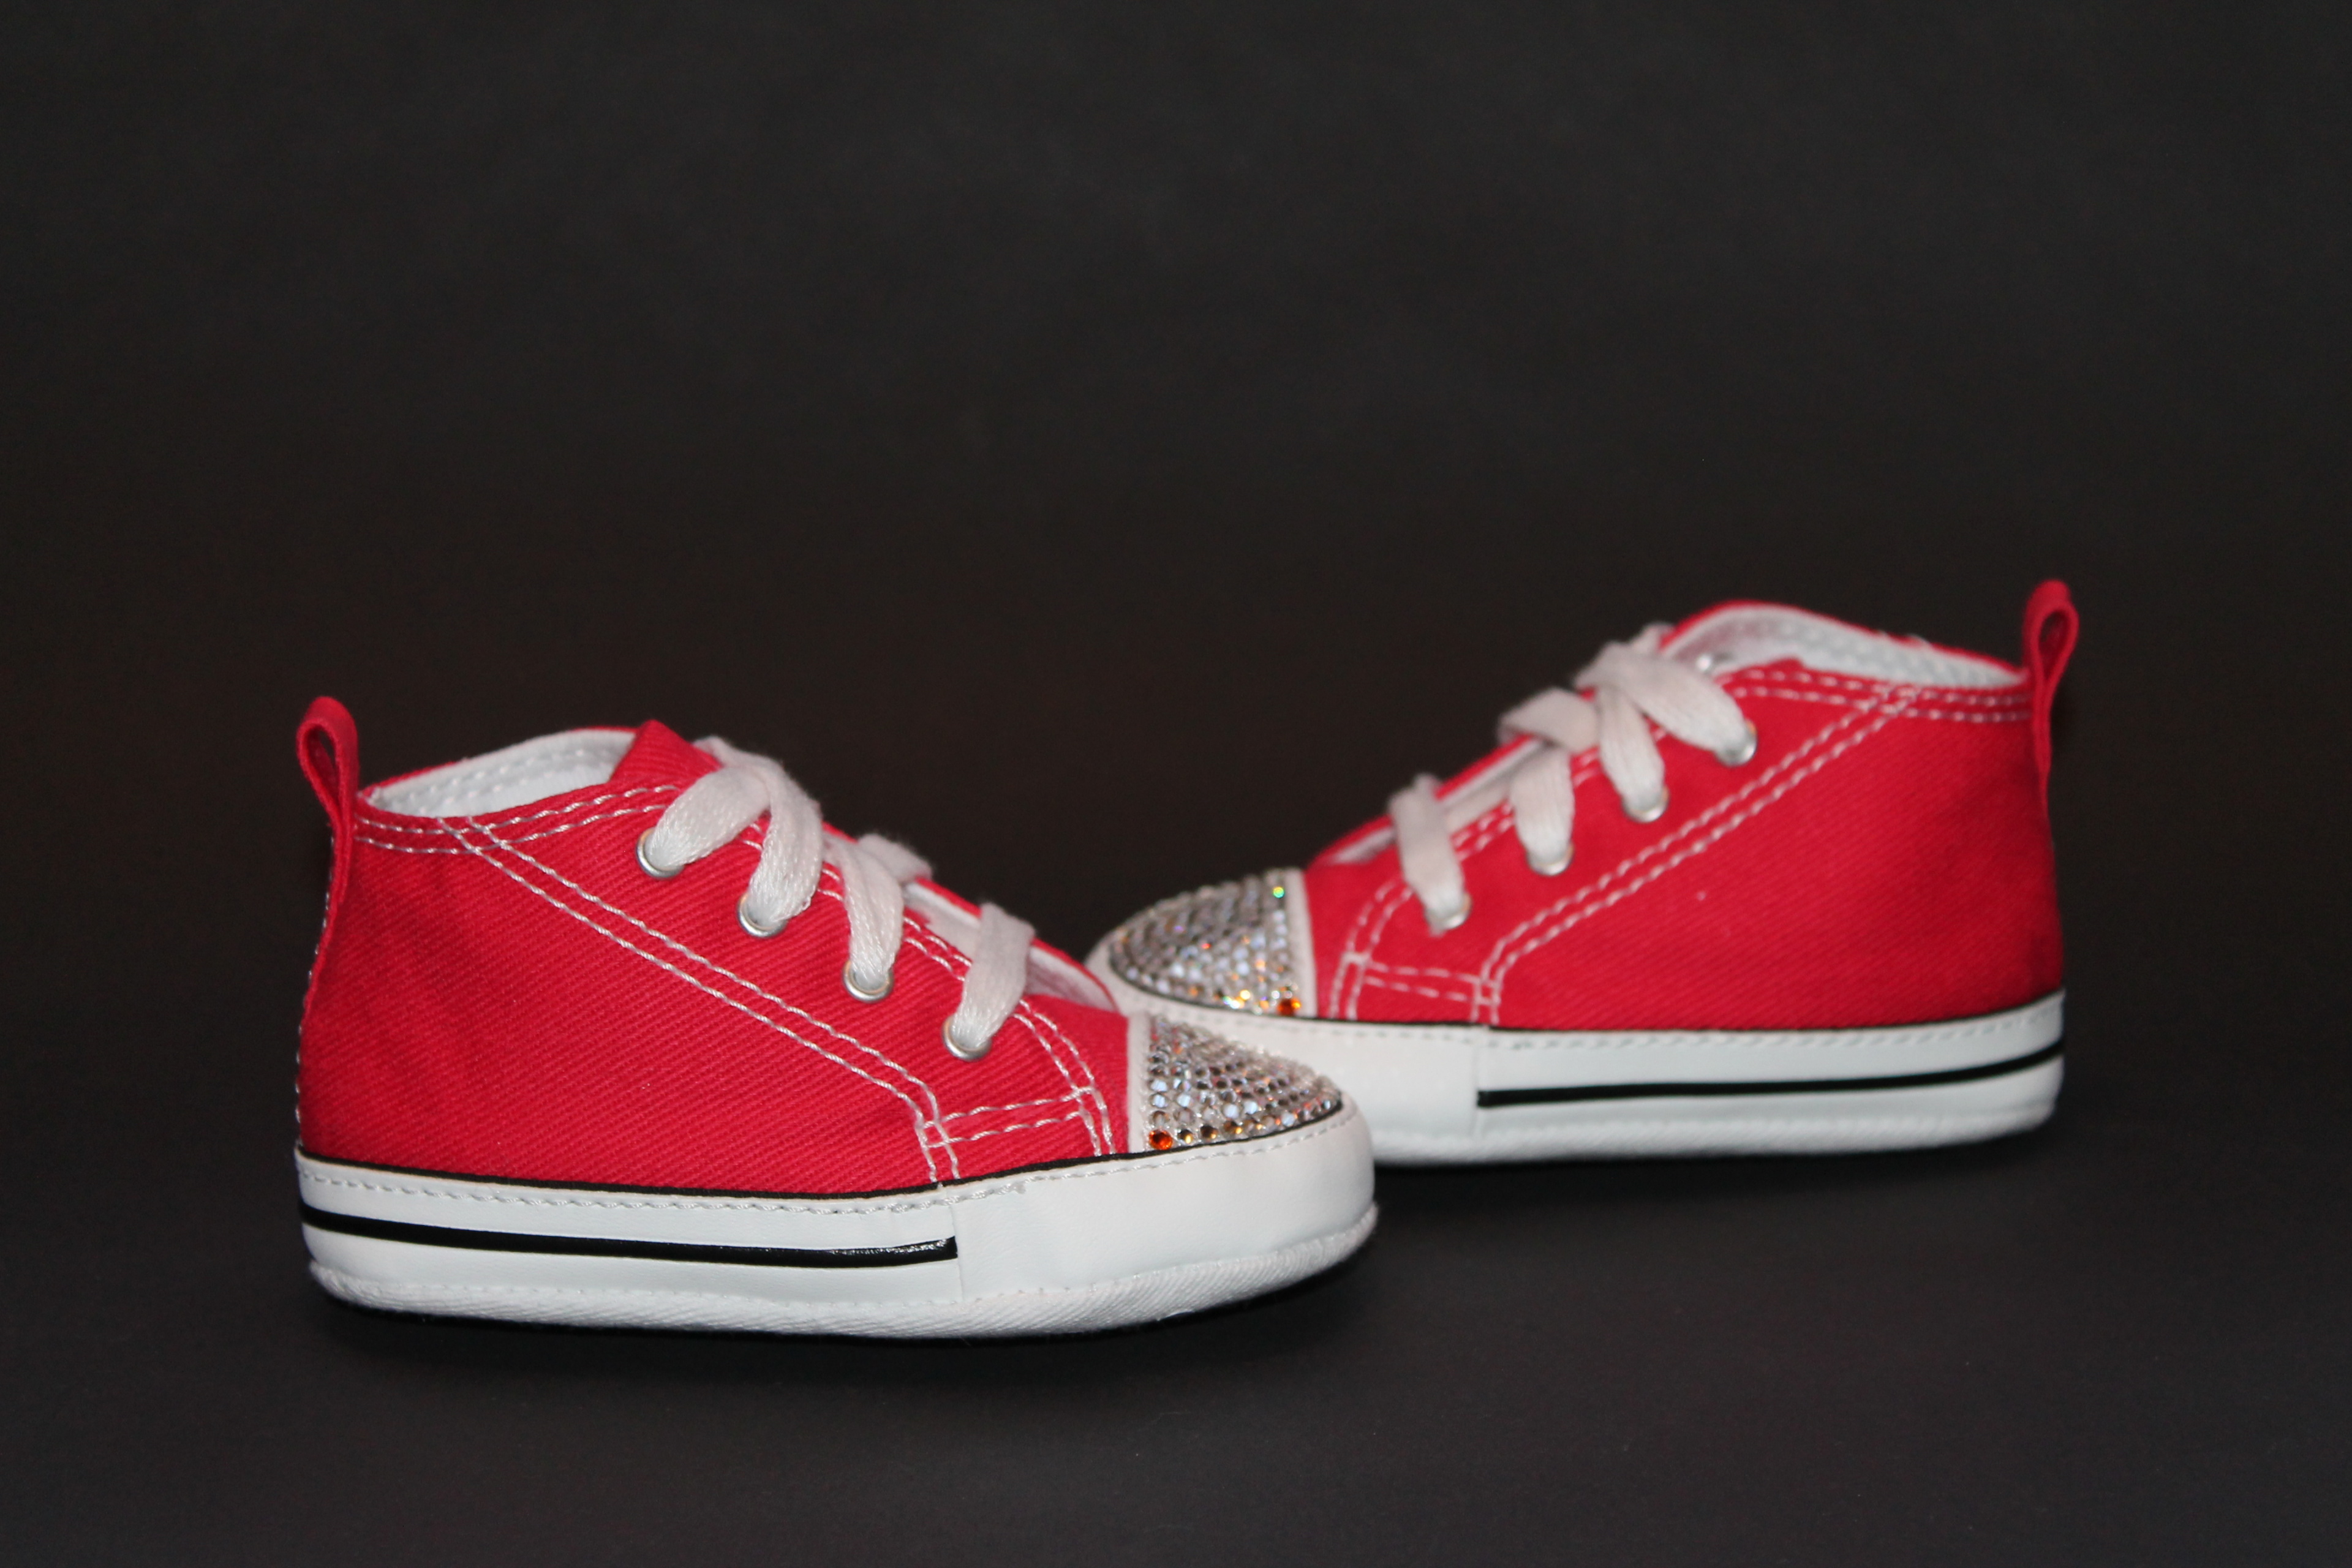 red converse crib shoes